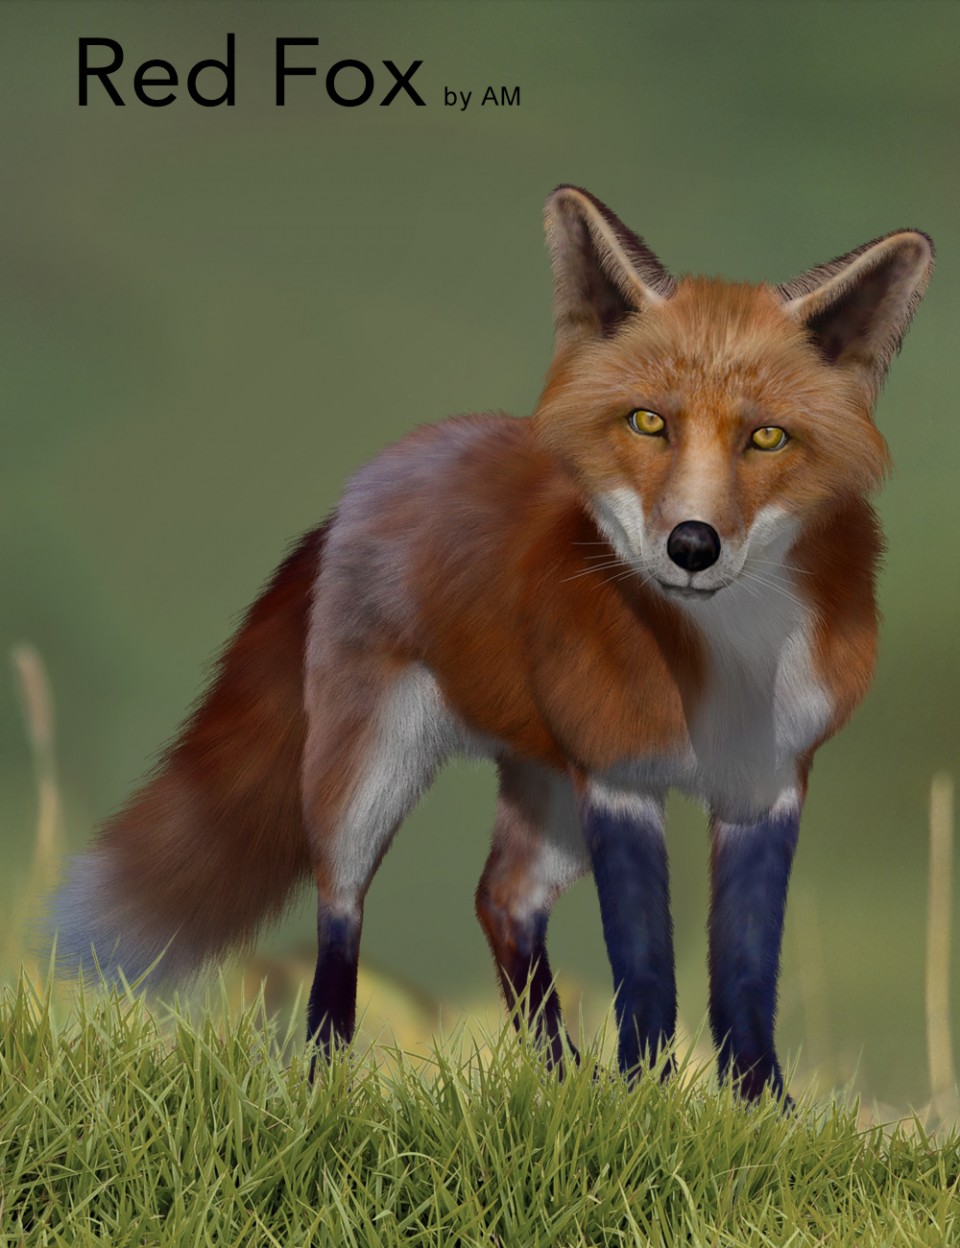 Red Fox by AM